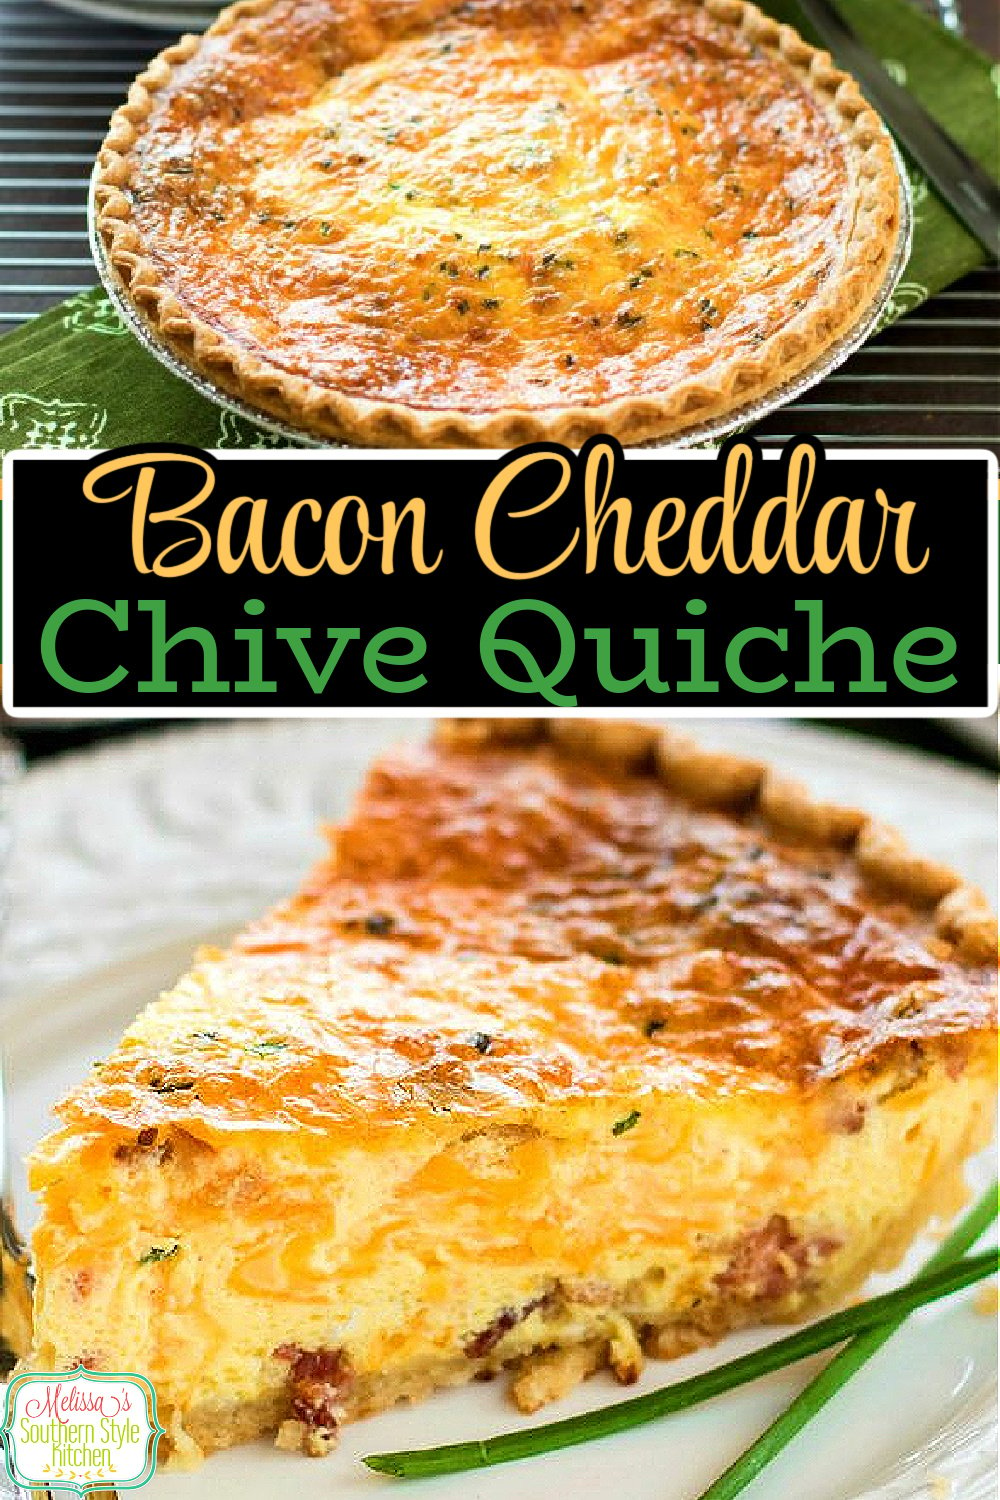 This simple Cheddar Bacon Chive Quiche makes a delicious entree for breakfast, brunch or brinner #baconquiche #bestquicherecipes #baconcheddarchivequiche #eggrecipes #edggs #brunch #breakfast #holidaybrunch #lunch #teatime #southernfood #southernrecipes #christmasbrunch #eaterbrunch #thanksgivingbrunch via @melissasssk